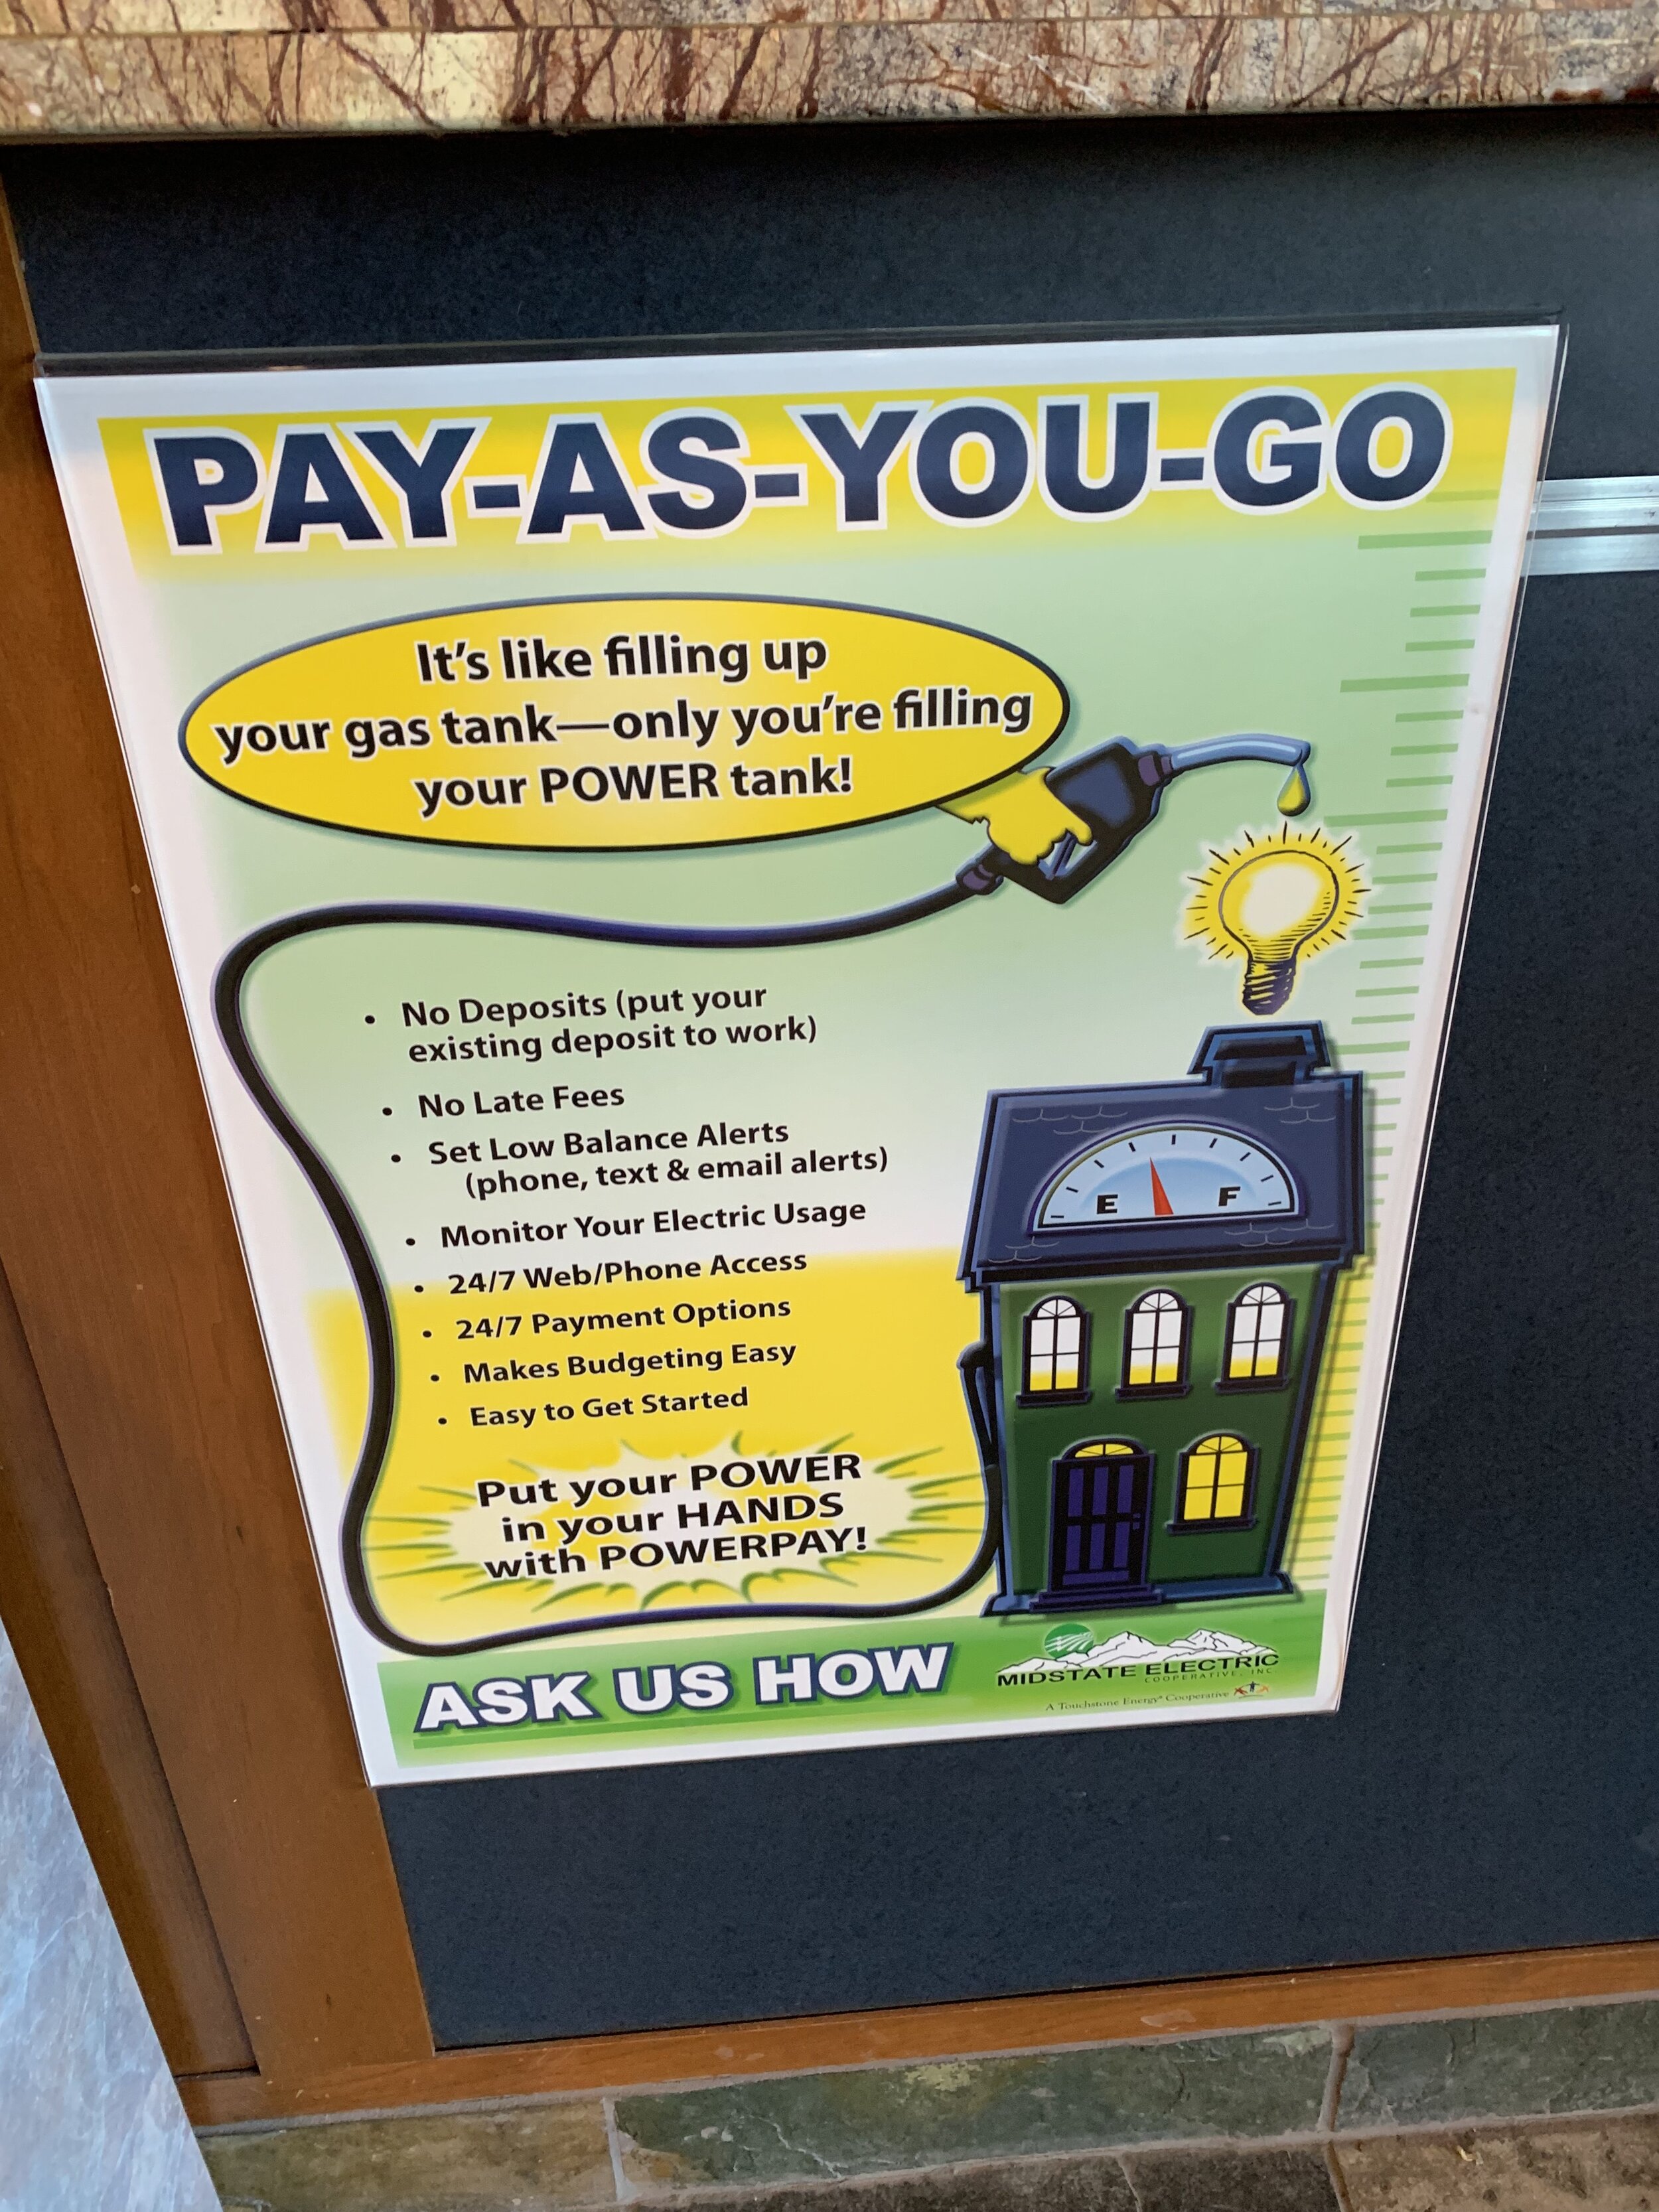 Midstate Electric Co-op offers a pay-as-you go program